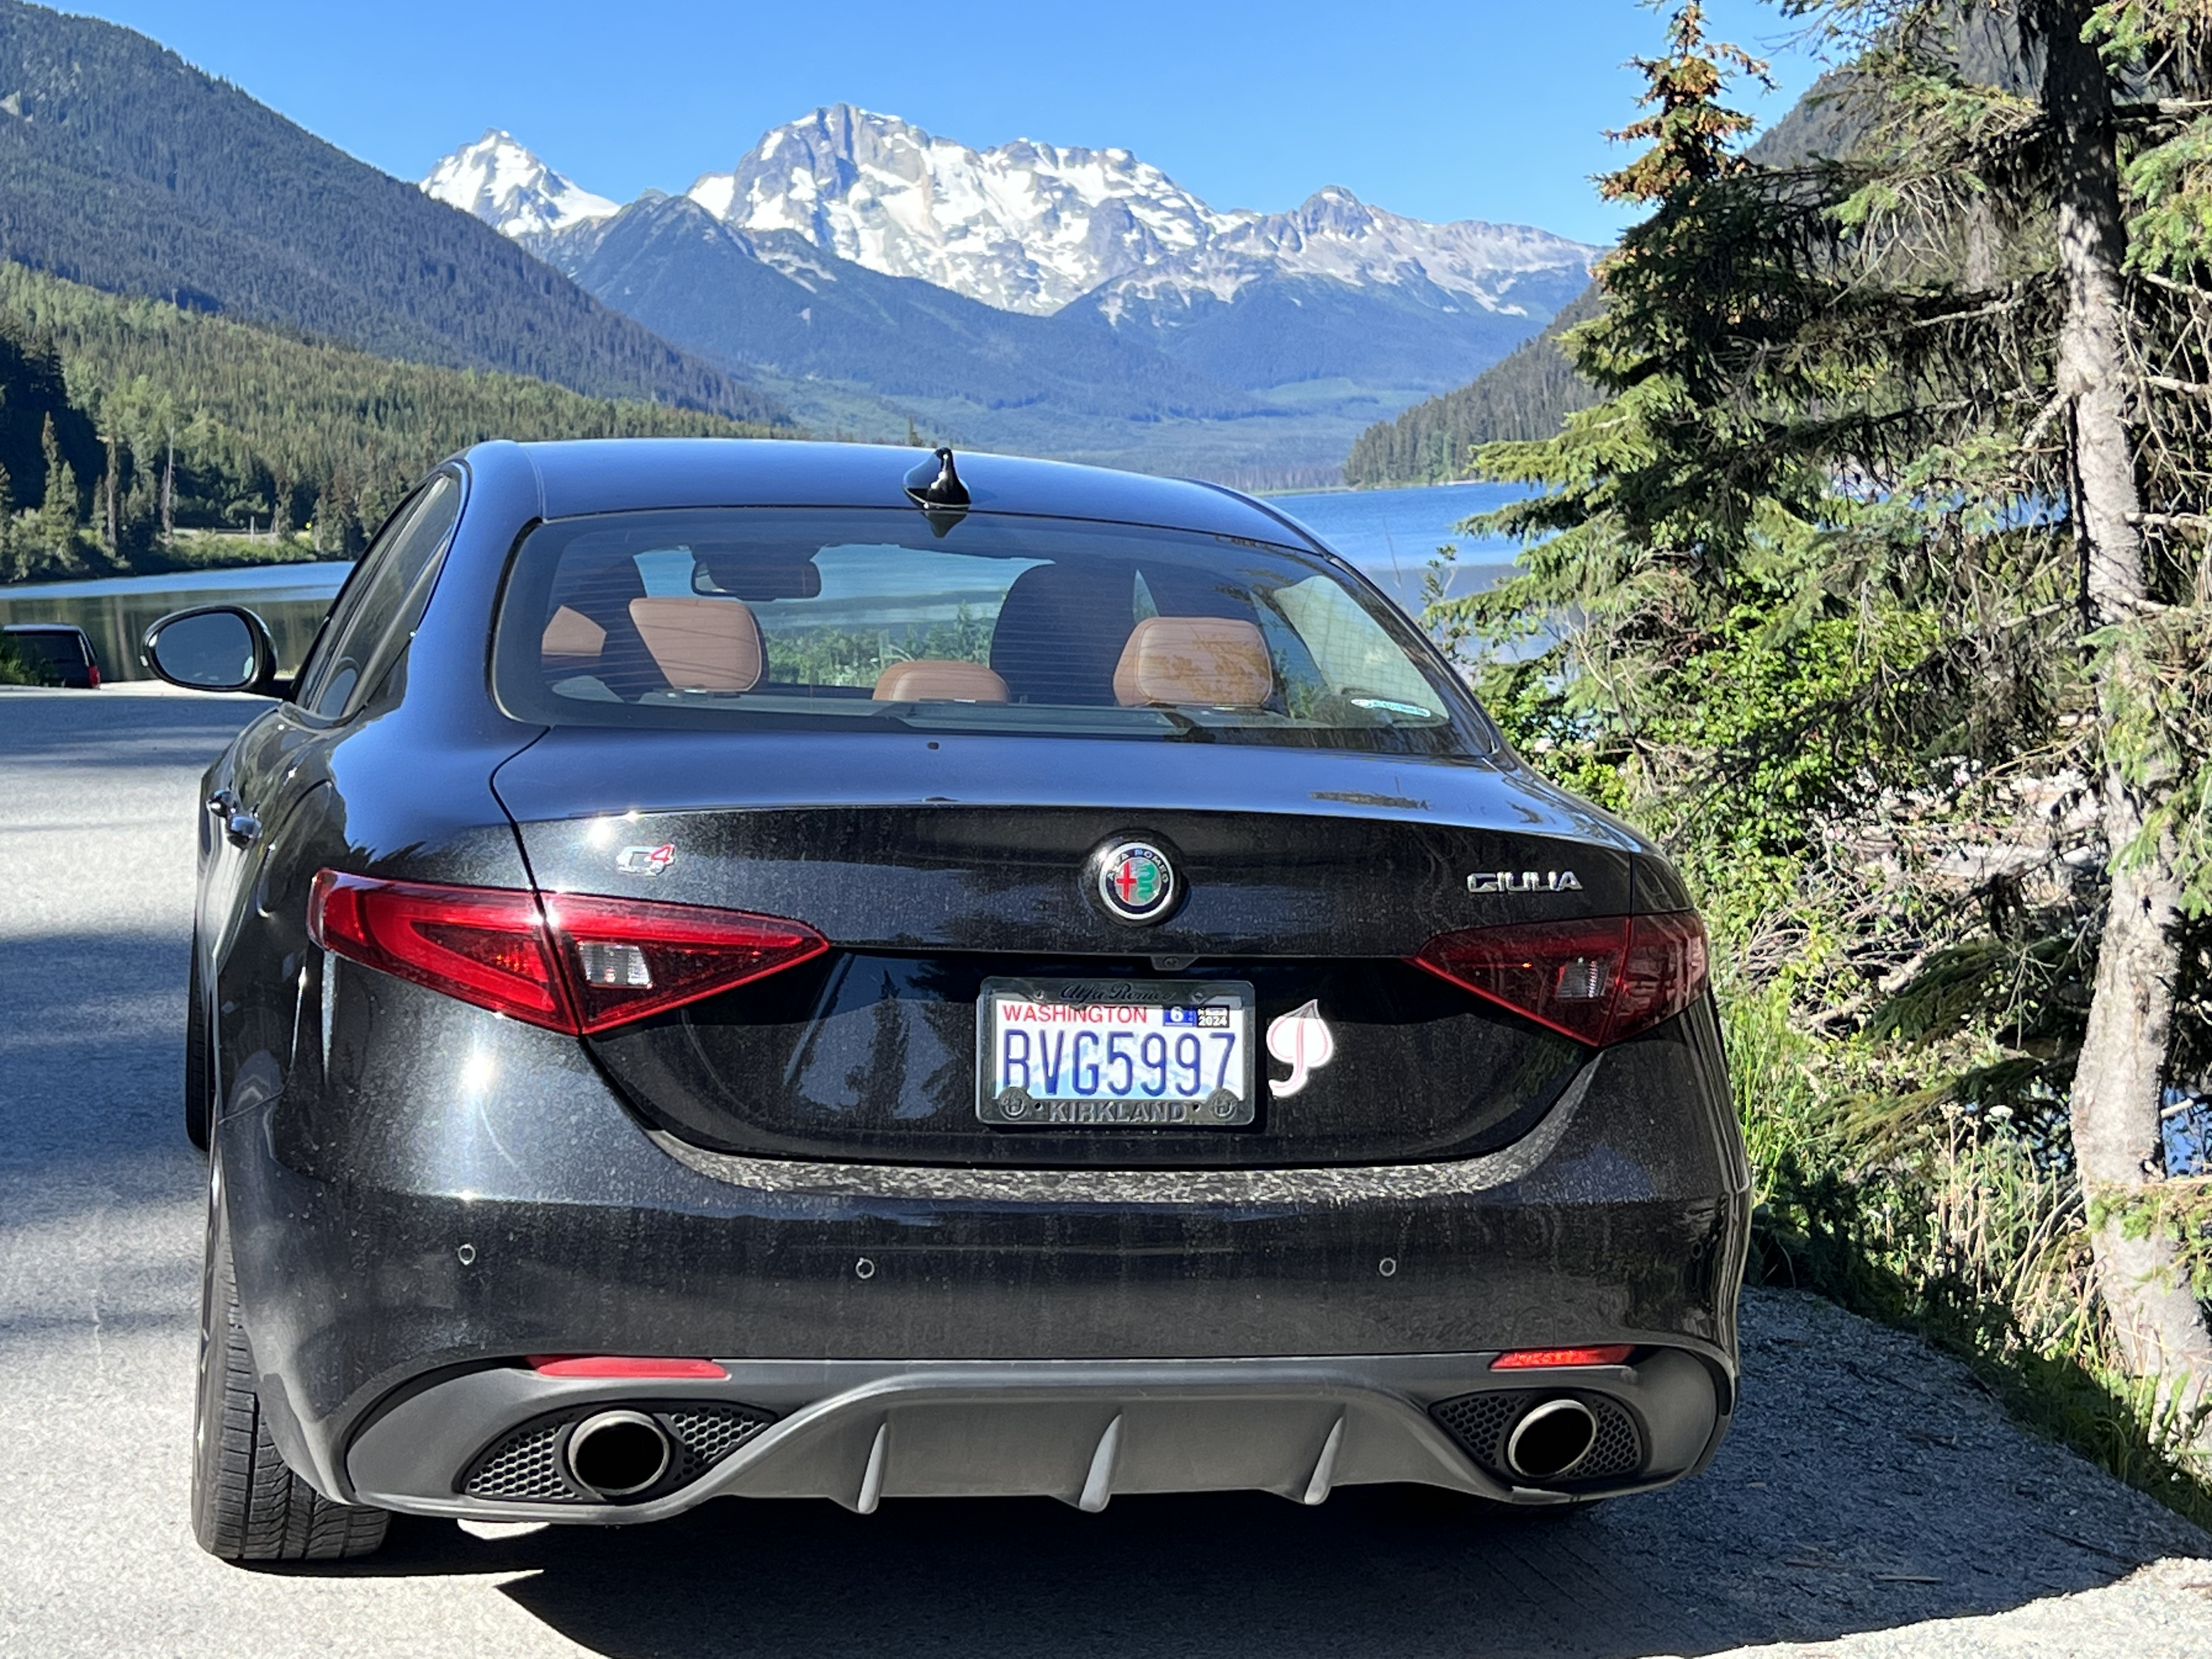 Giulia with lake and mountains in BC